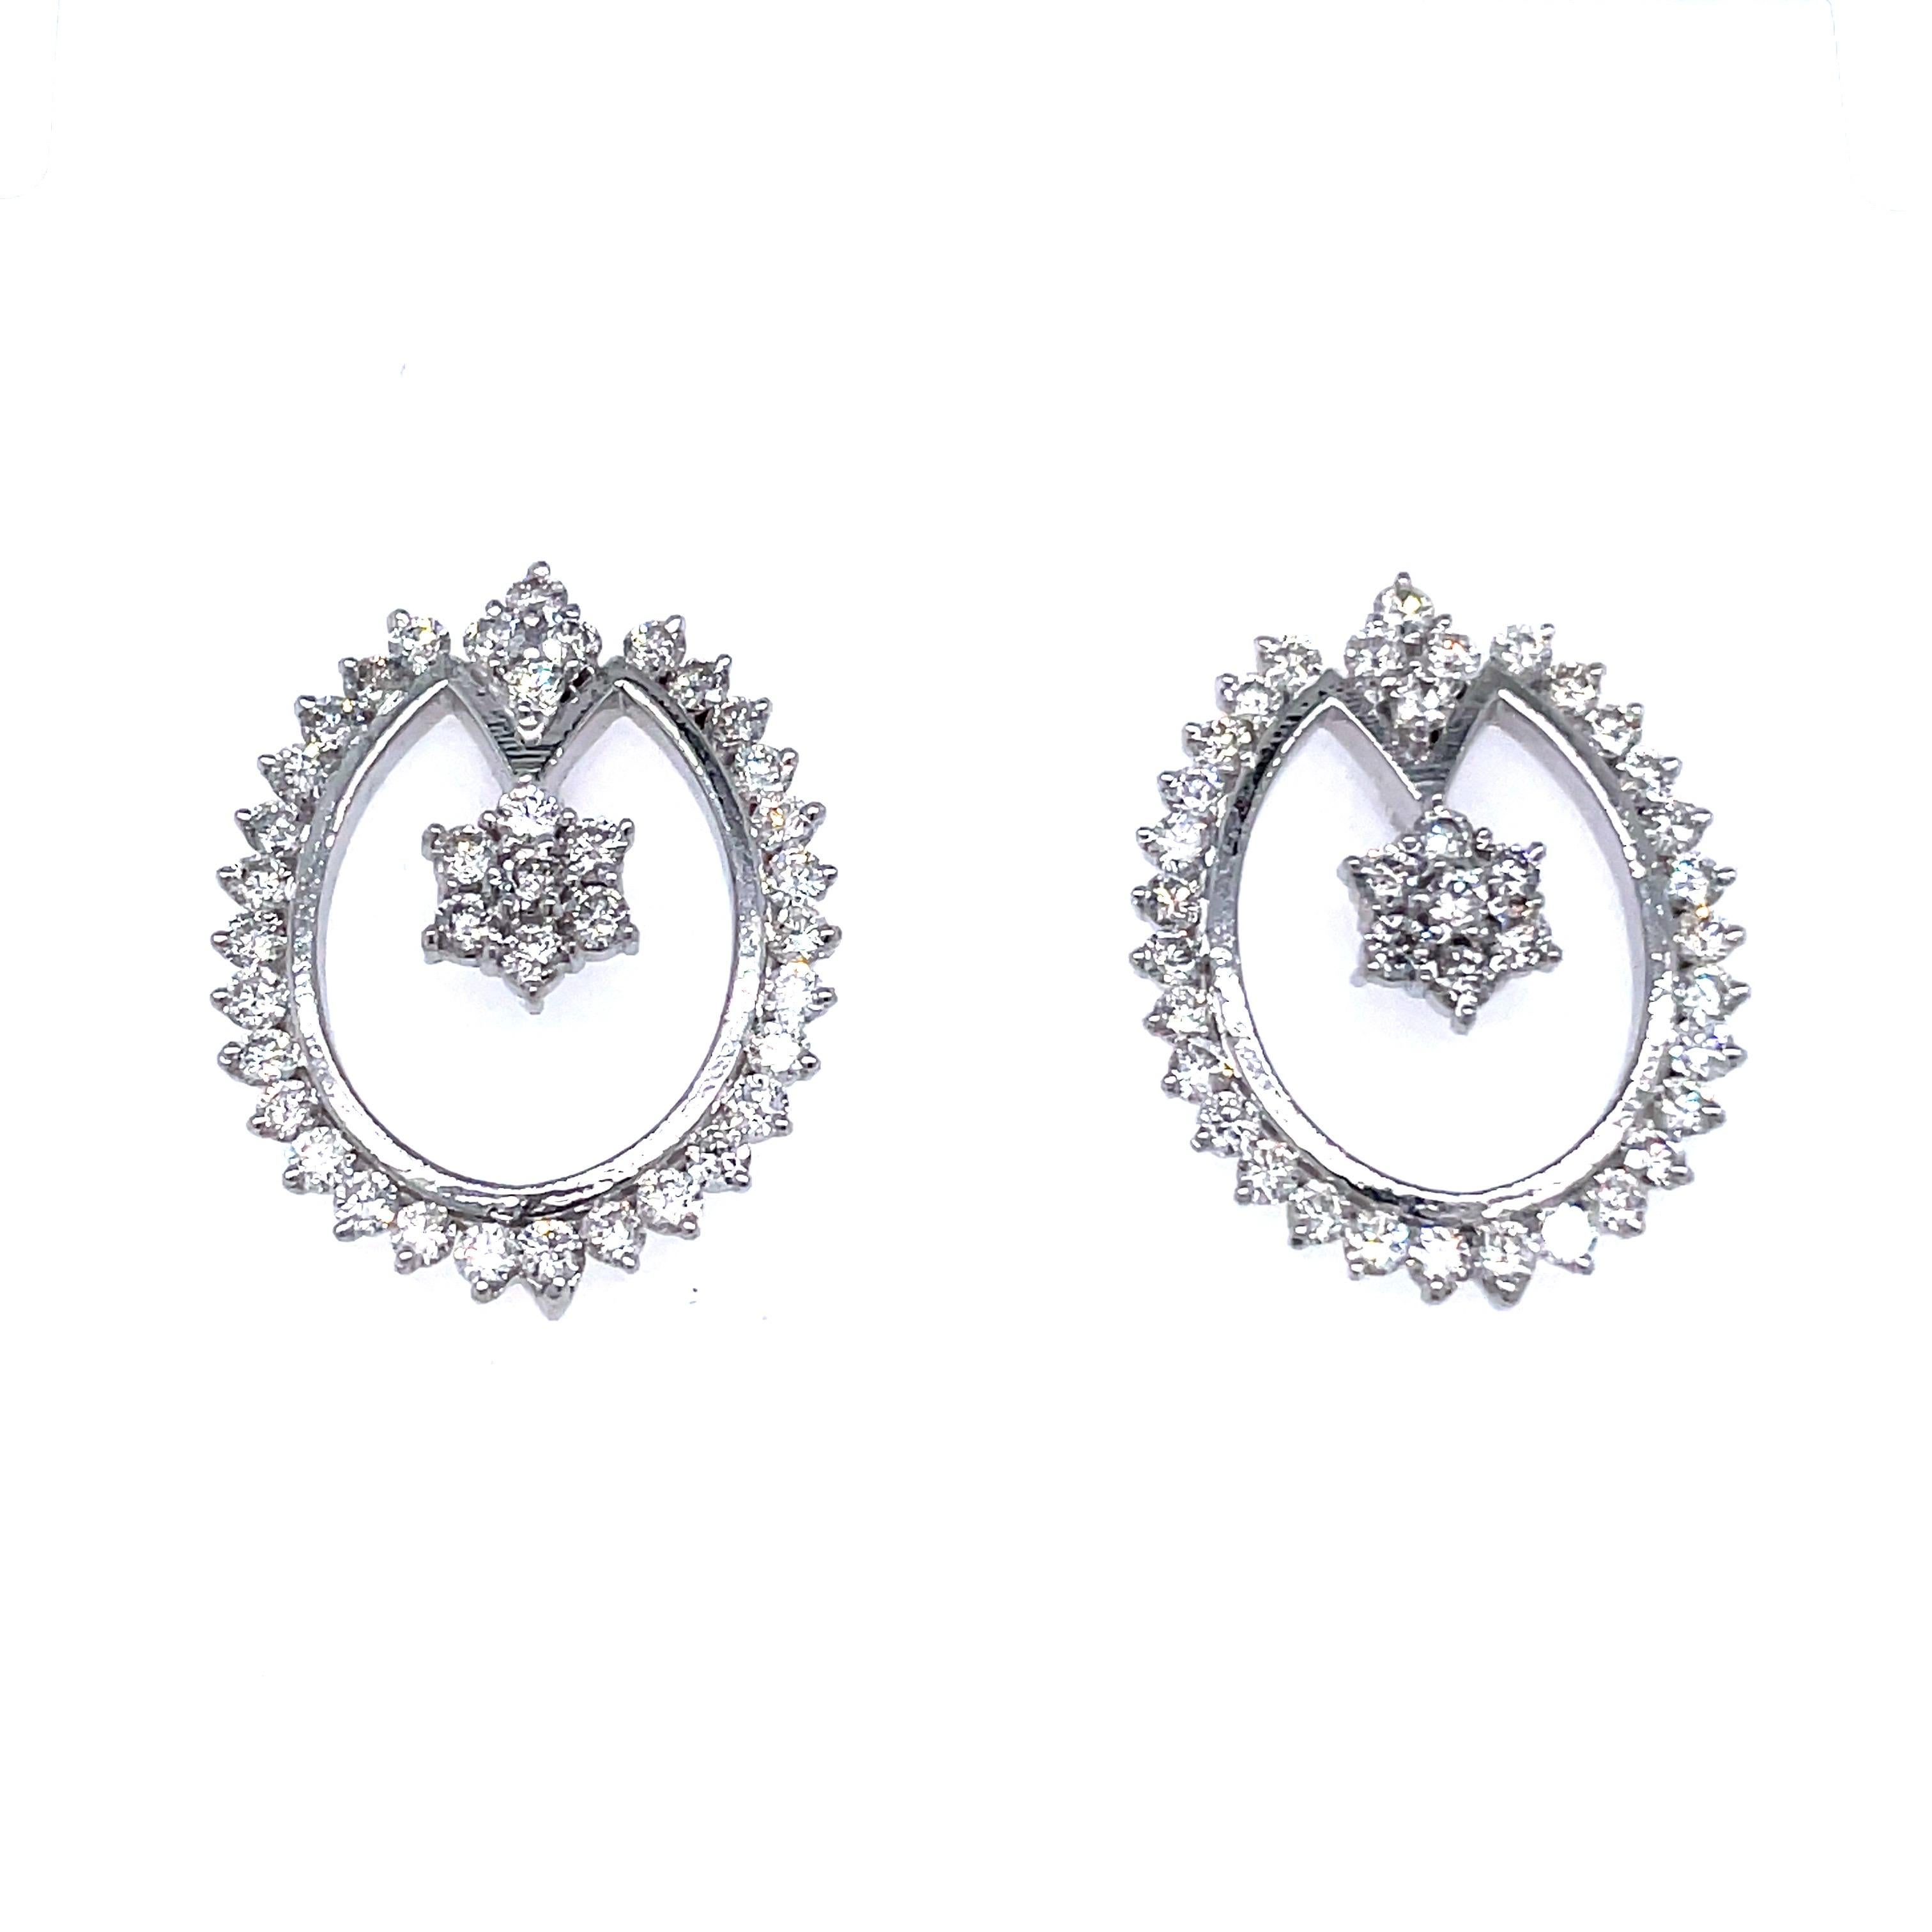 14k White Gold Diamond Earrings With Tulip Pattern

Glistening diamonds, totaling 1.79 carats, grace these earrings with their brilliant radiance. 

Fashioned from 14k white gold, these earrings weigh 4.98 grams, offering a blend of luxurious